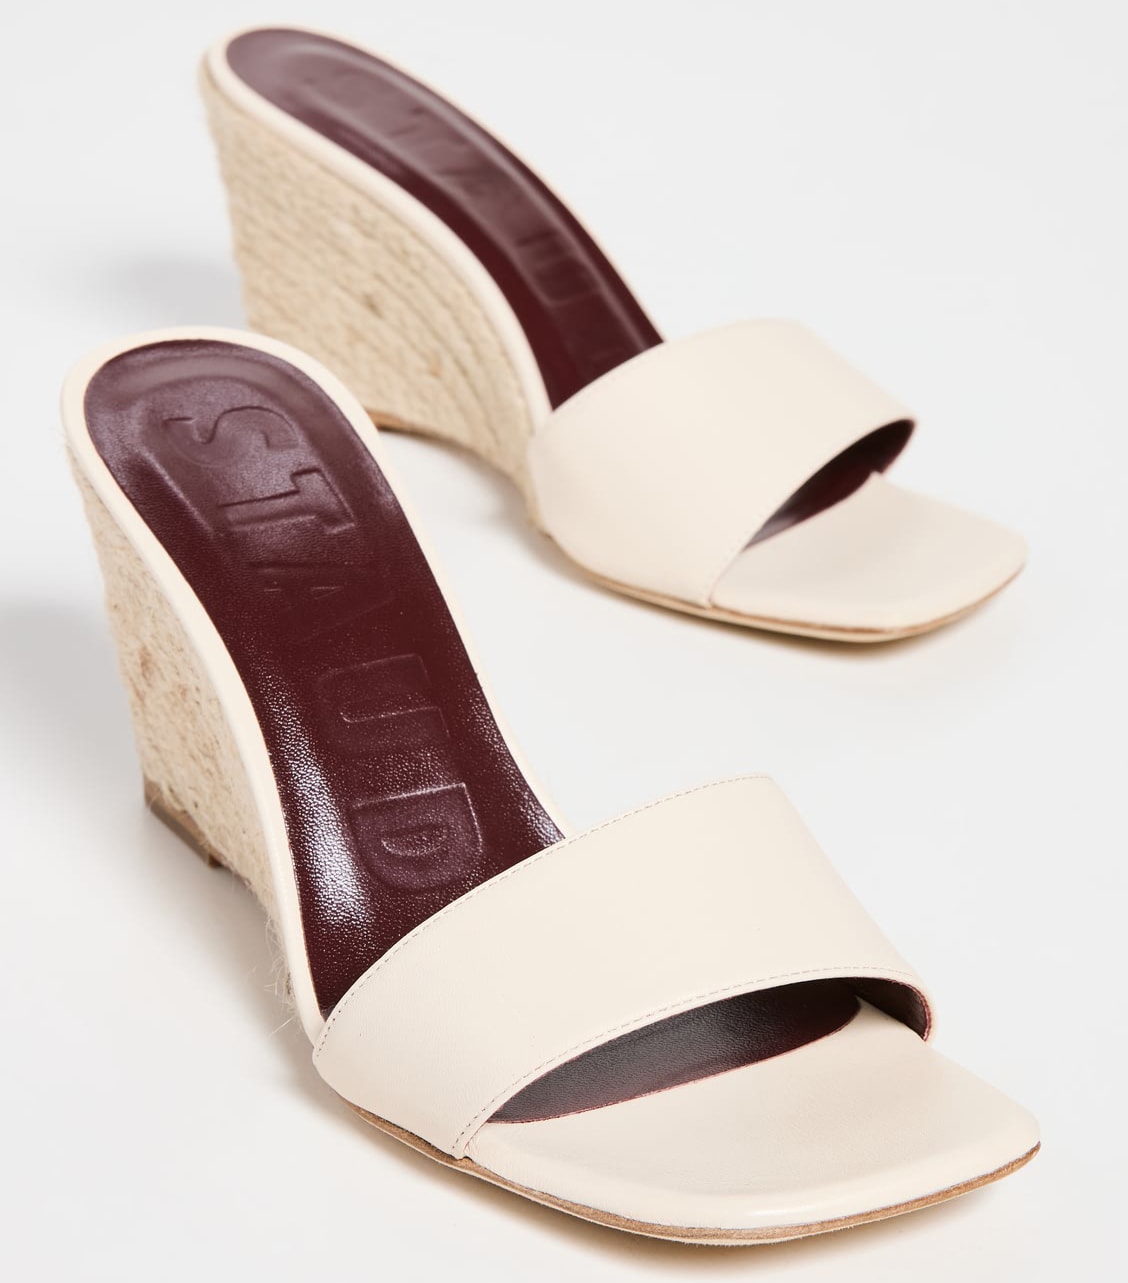 The perfect summer heels, Staud's Billie sandals feature espadrille wedge heels and trendy square toes